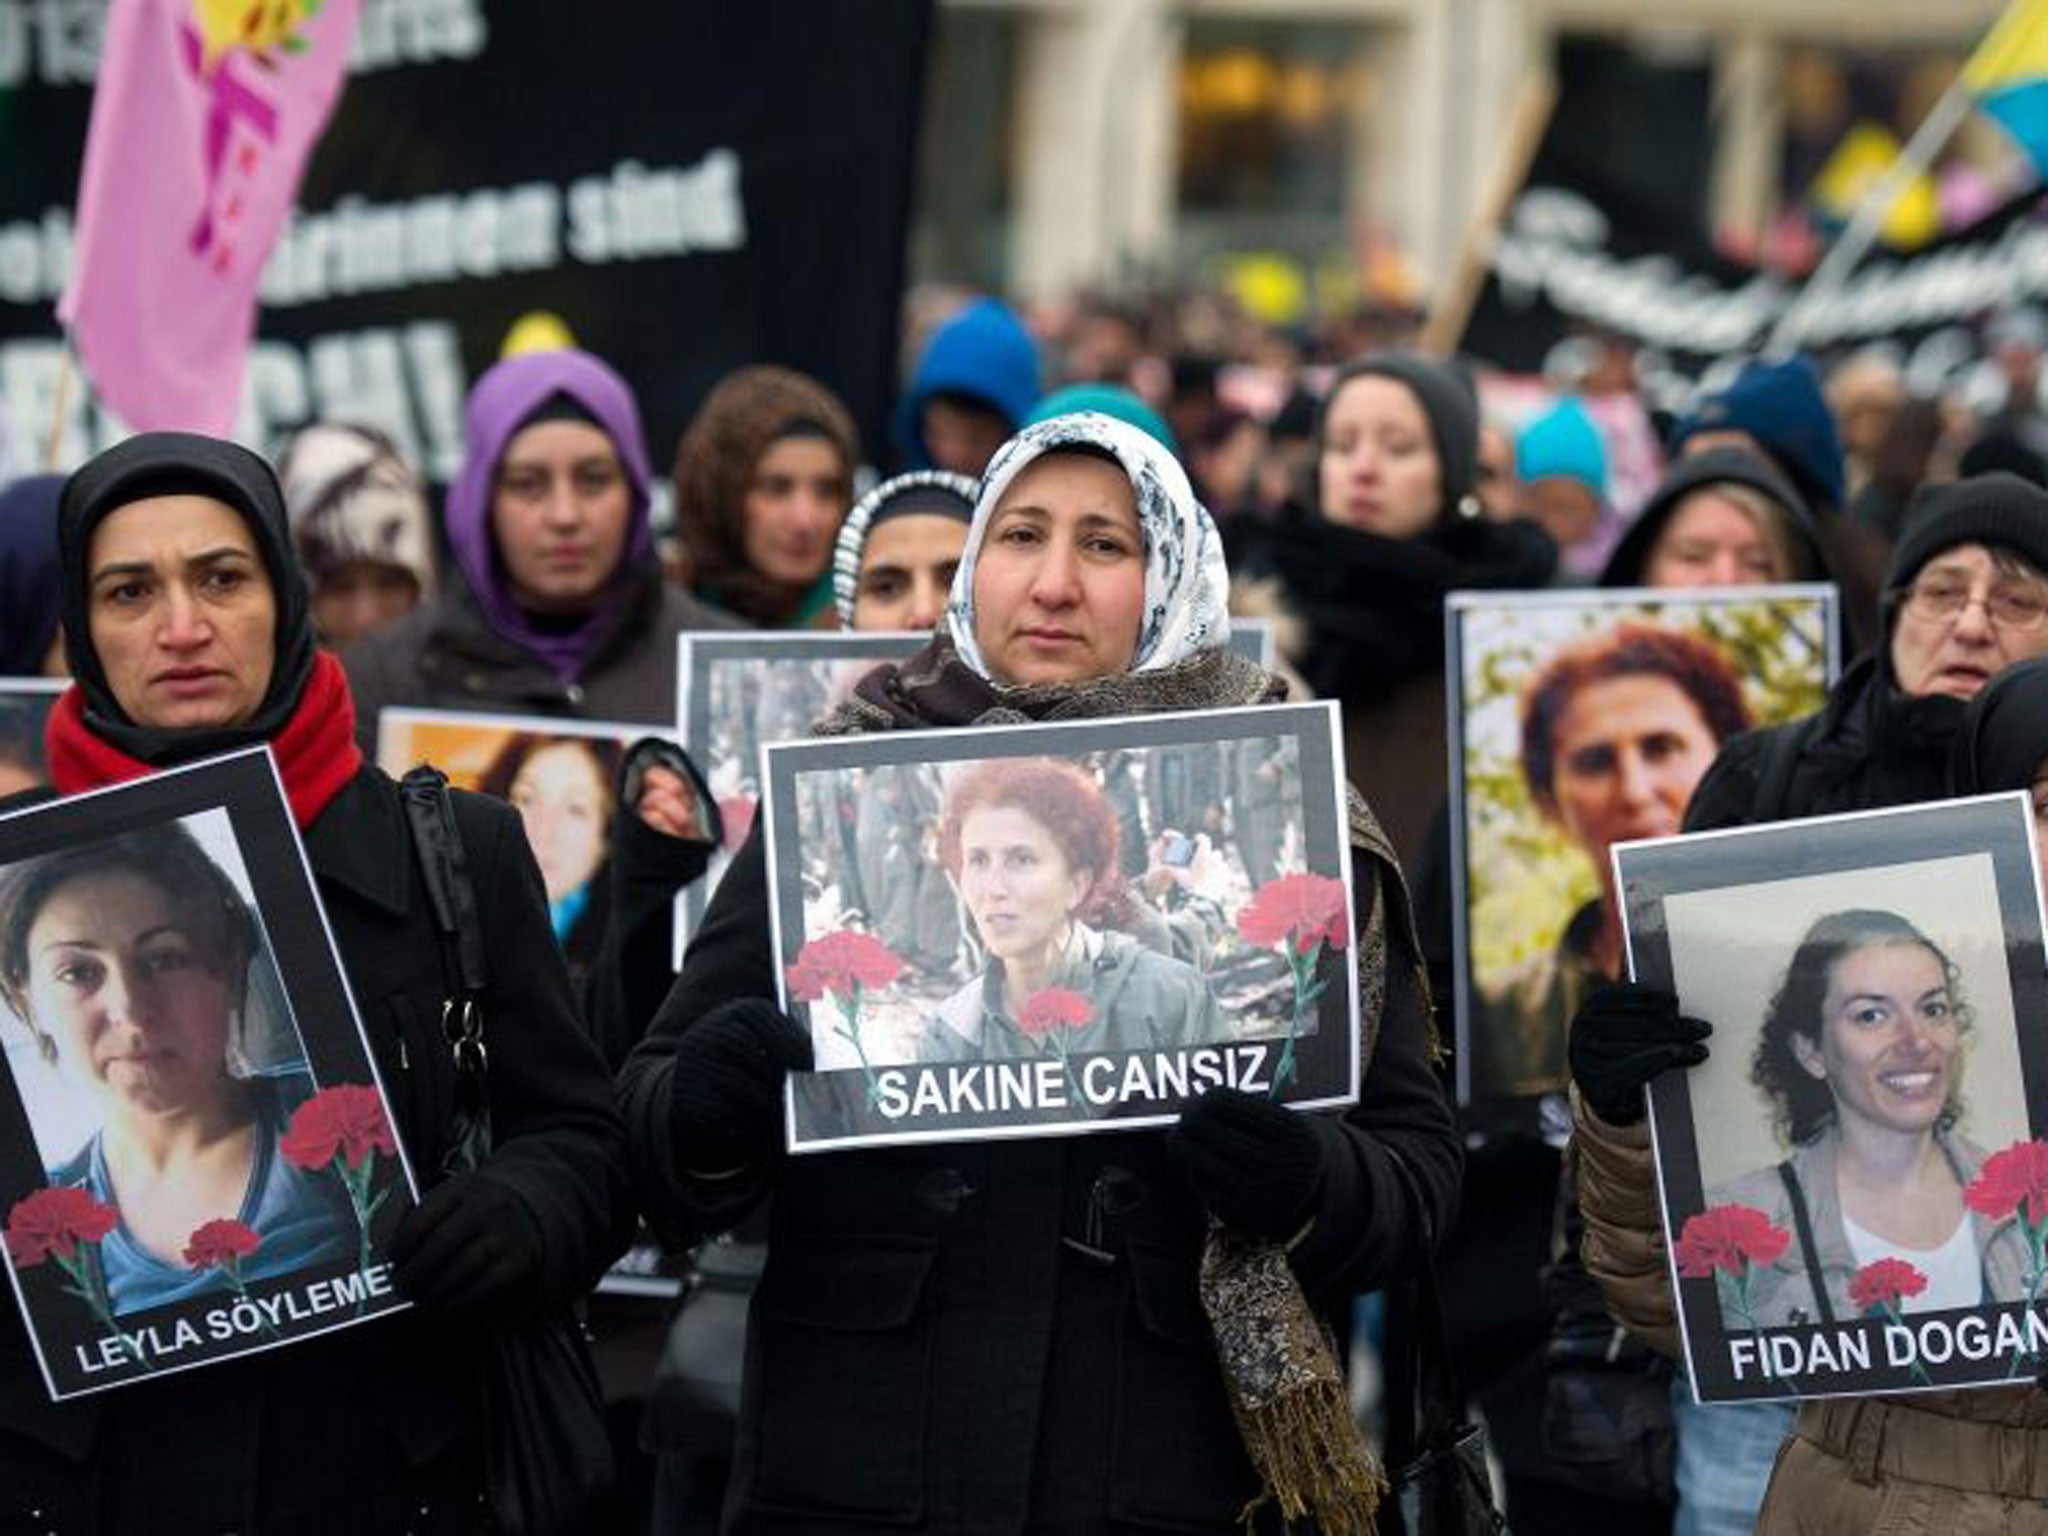 Members of Kurdish organizations carry pictures of three murdered female Kurdish activists during a demonstration in Hamburg